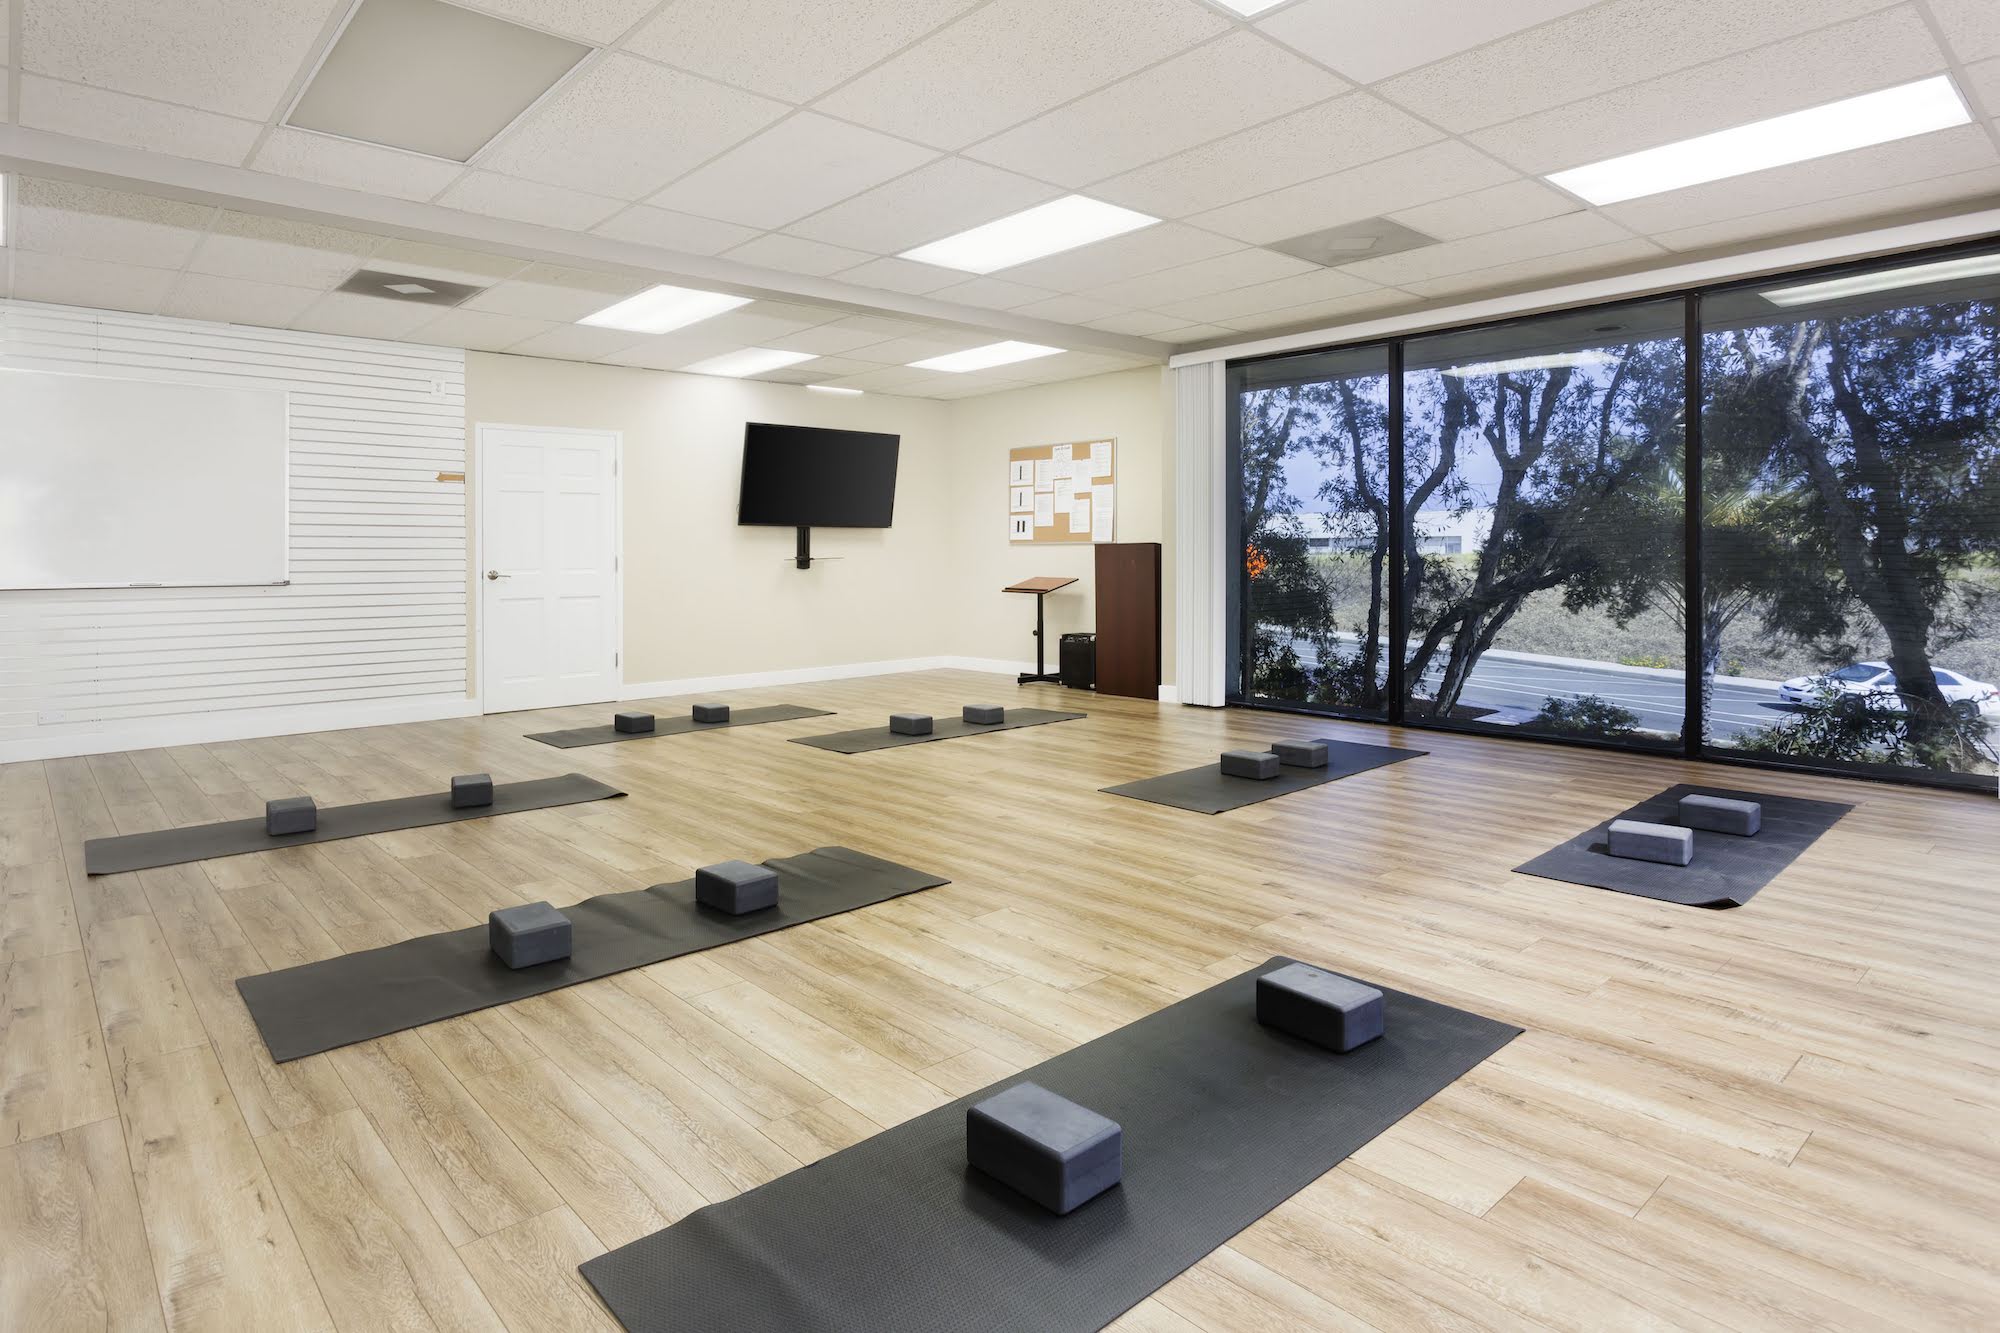 Yoga Room of the Clear Recovery Center intensive outpatient rehab in Redondo Beach